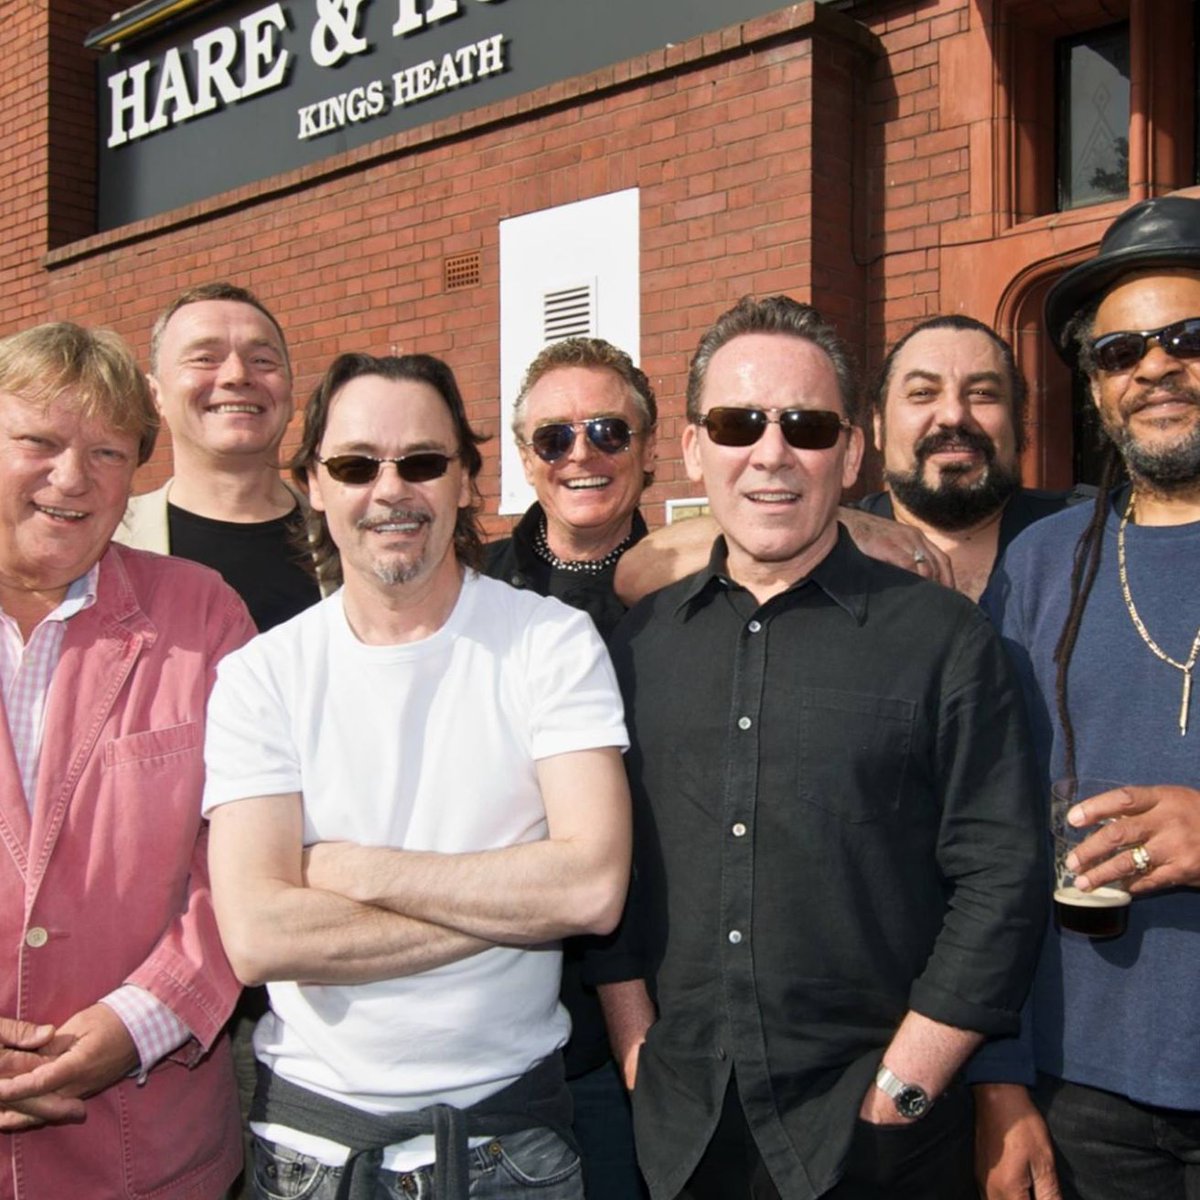 On this day in 1979 we played our first ever gig at the @HareandHounds Kings Heath, still one of the best independent live music venues in Birmingham. Check out the shots of us receiving our Heritage Award! Big Love UB40 #UB40 #UB45 #Reggae #OnThisDay